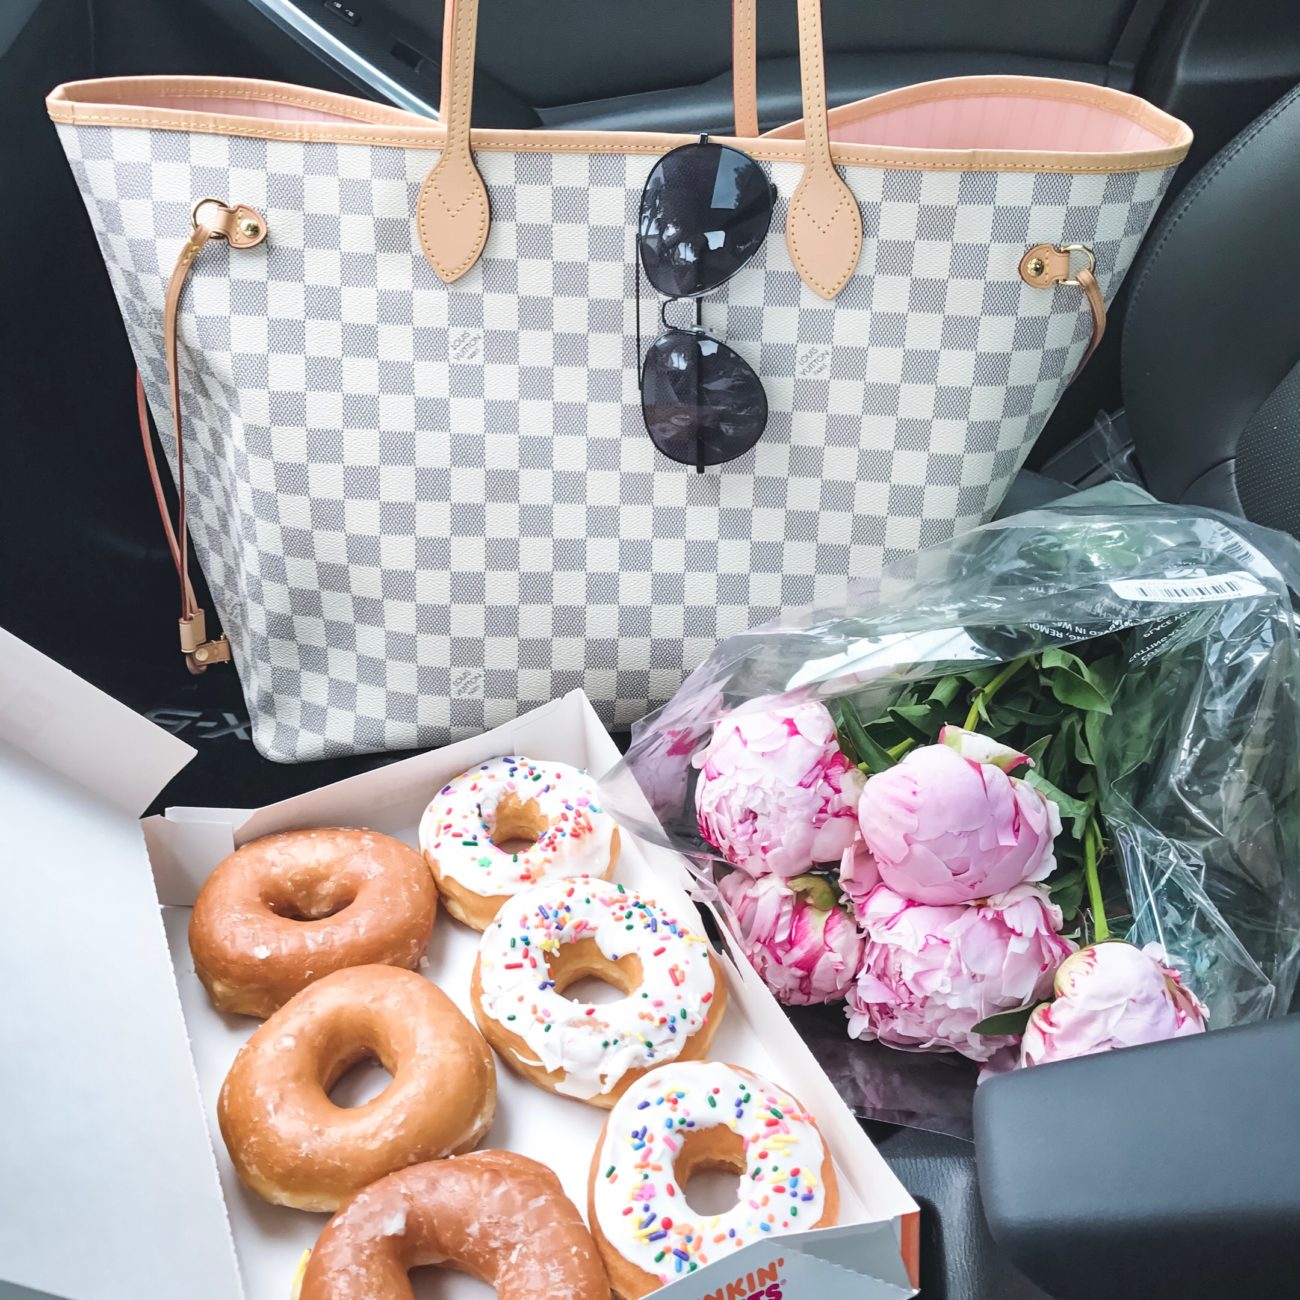 LV Fashion House Donuts - Available in Two Designs